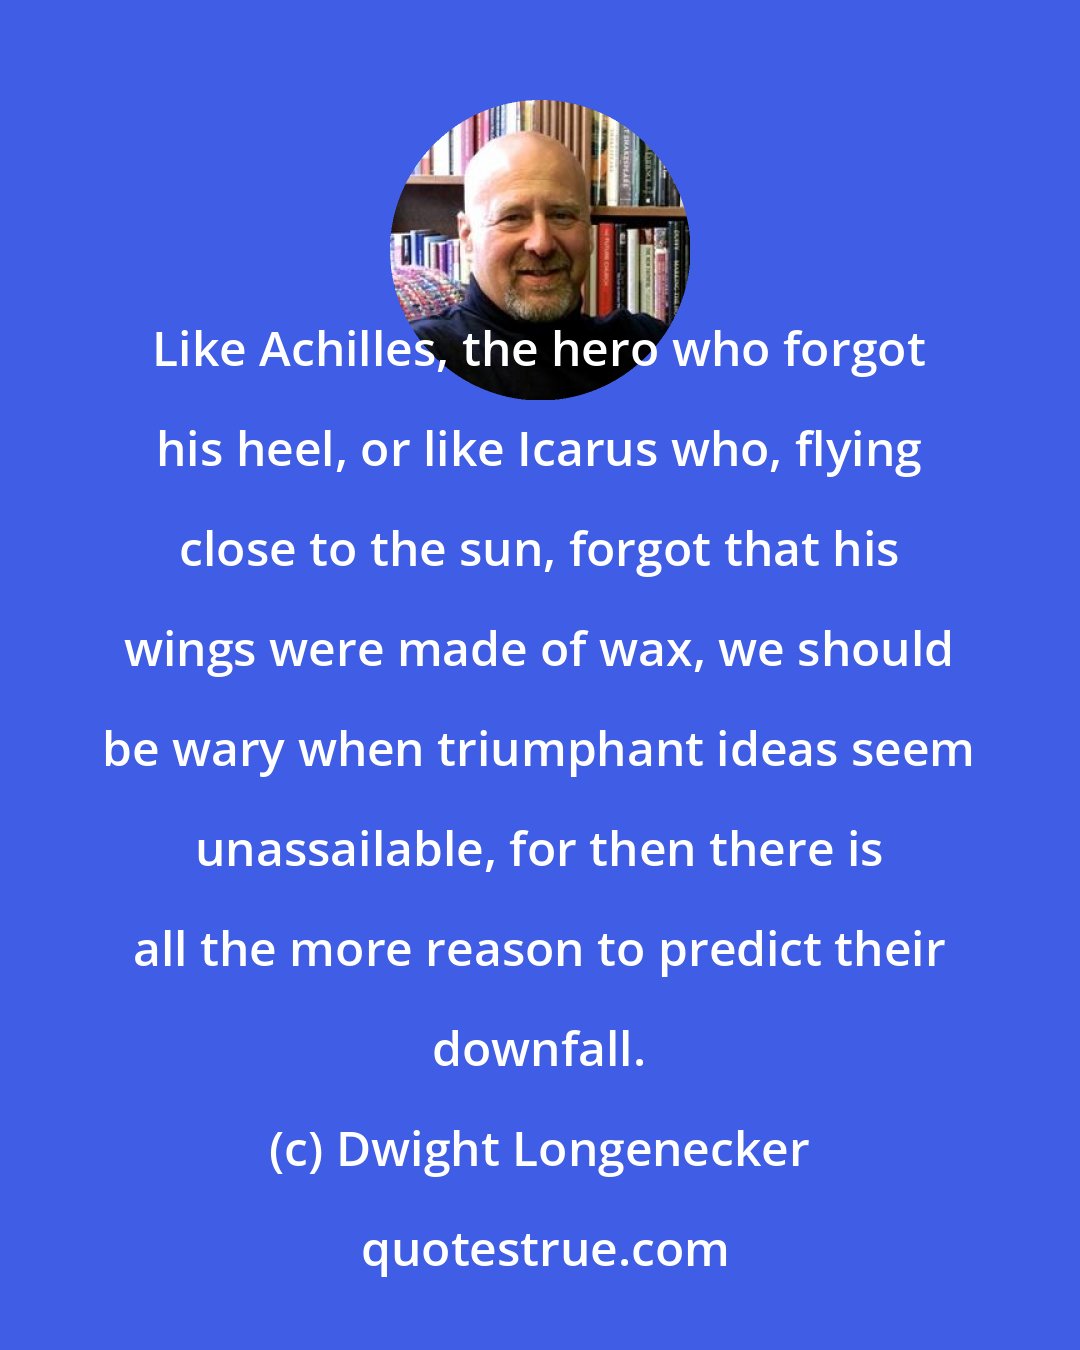 Dwight Longenecker: Like Achilles, the hero who forgot his heel, or like Icarus who, flying close to the sun, forgot that his wings were made of wax, we should be wary when triumphant ideas seem unassailable, for then there is all the more reason to predict their downfall.